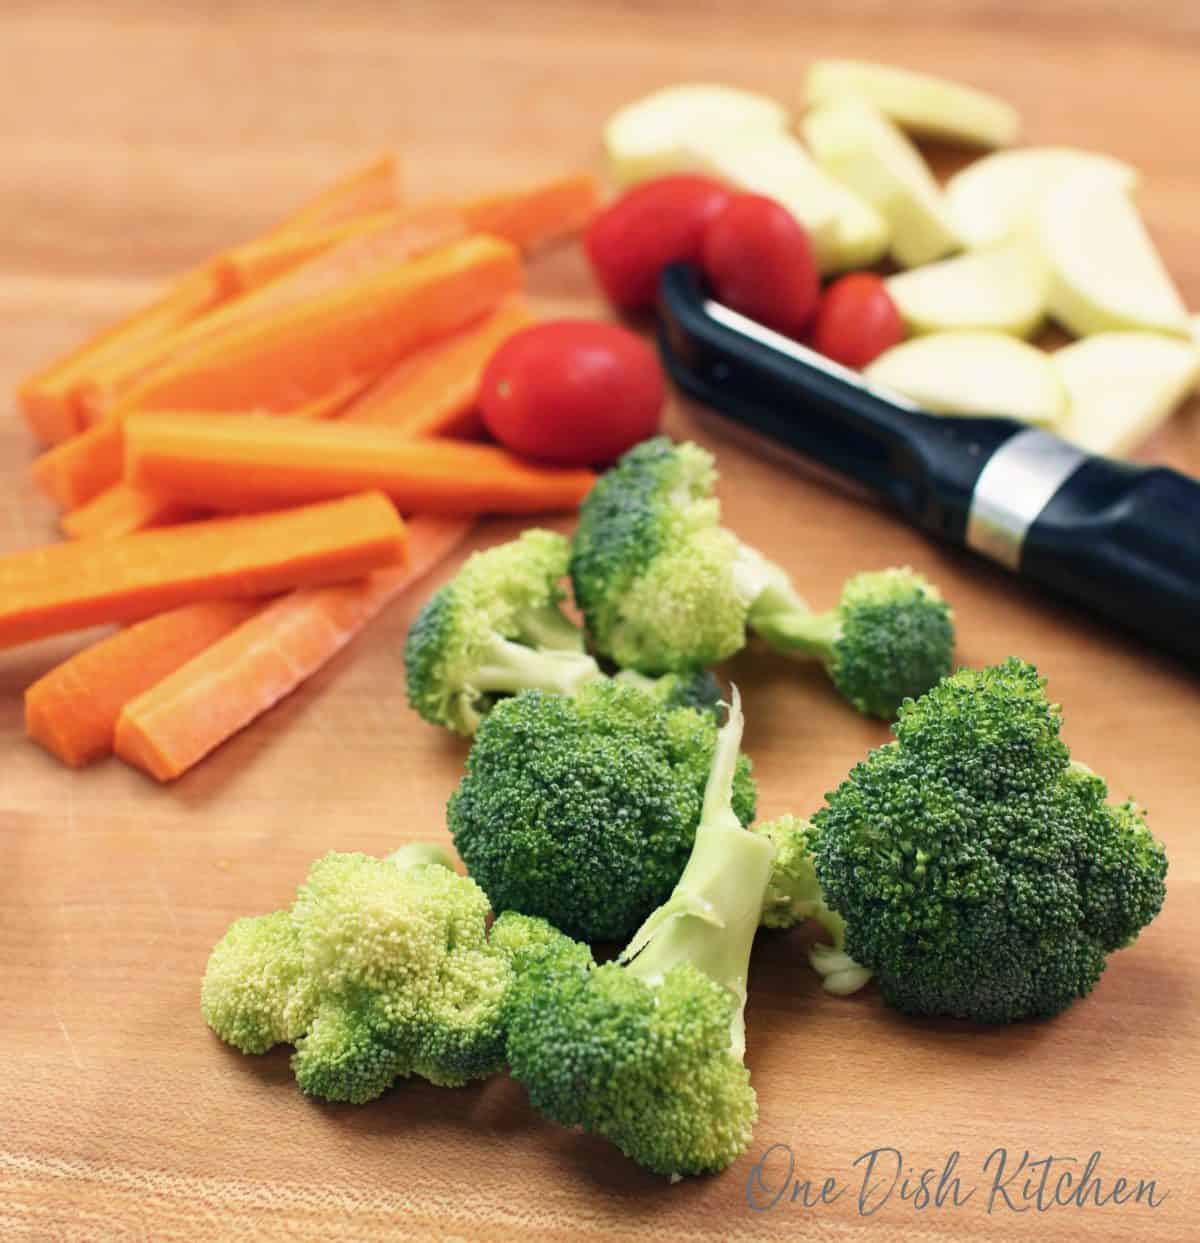 broccoli, carrots, tomatoes and zucchini on a brown cutting board next to a vegetable peeler.